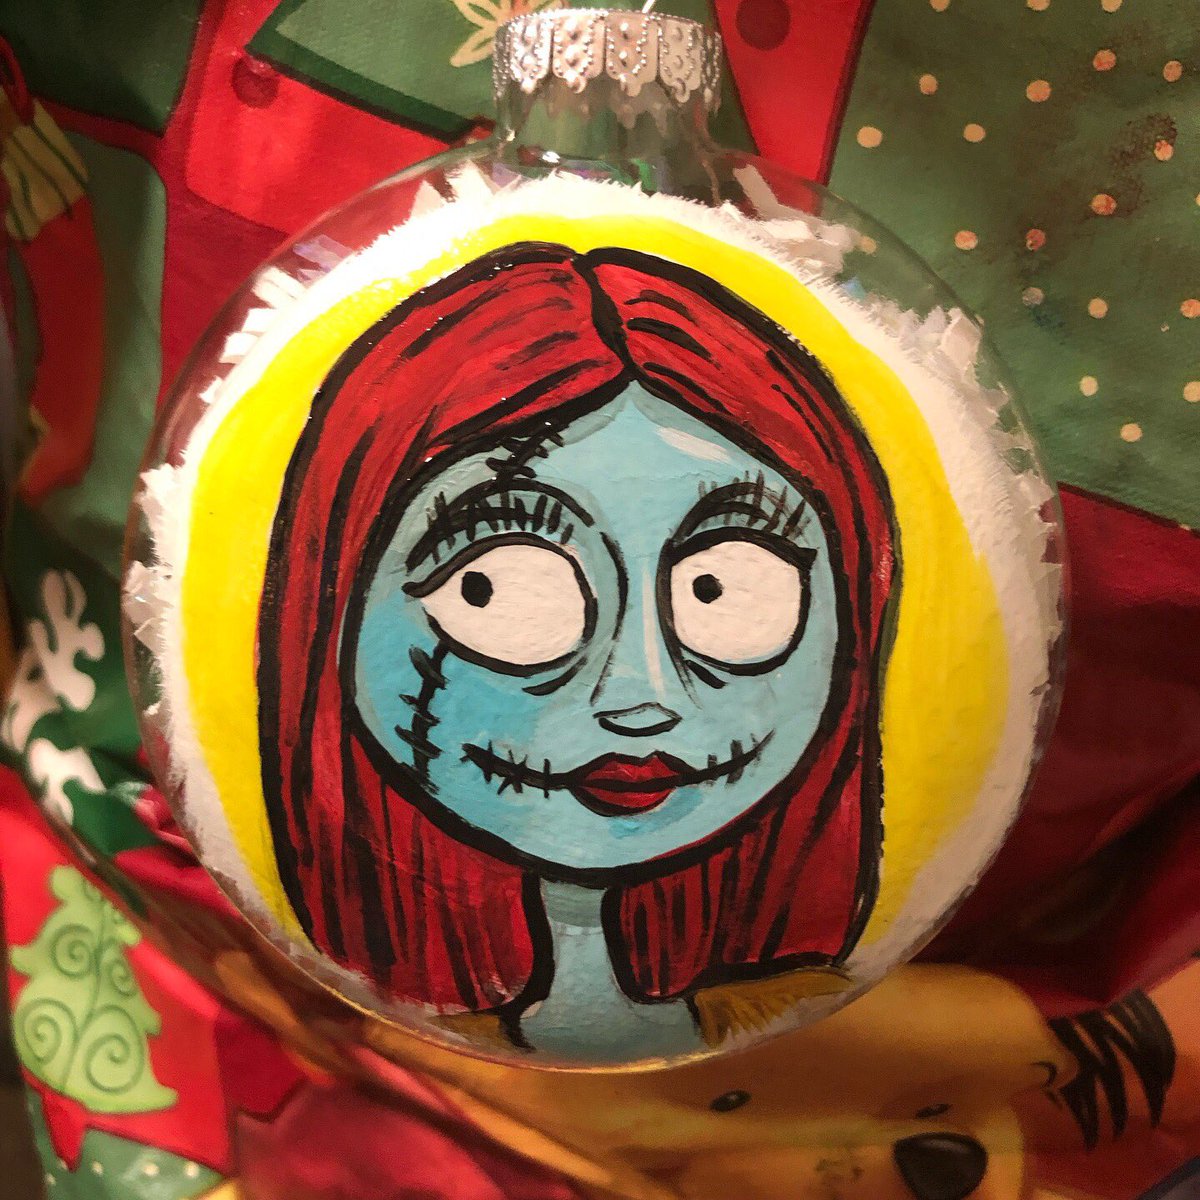 Made a new one! I’m done for the night #sally #thenightmarebeforechristmas #jack #freehand #acrylicpaint #glassornament #christmas #artista #chicana #chicanaart #chicanaartist #chicanx #chicanxart #chicanxartist #xicana #xicanaart #xicanaartist #chicano #chicanoart #chicanoartist